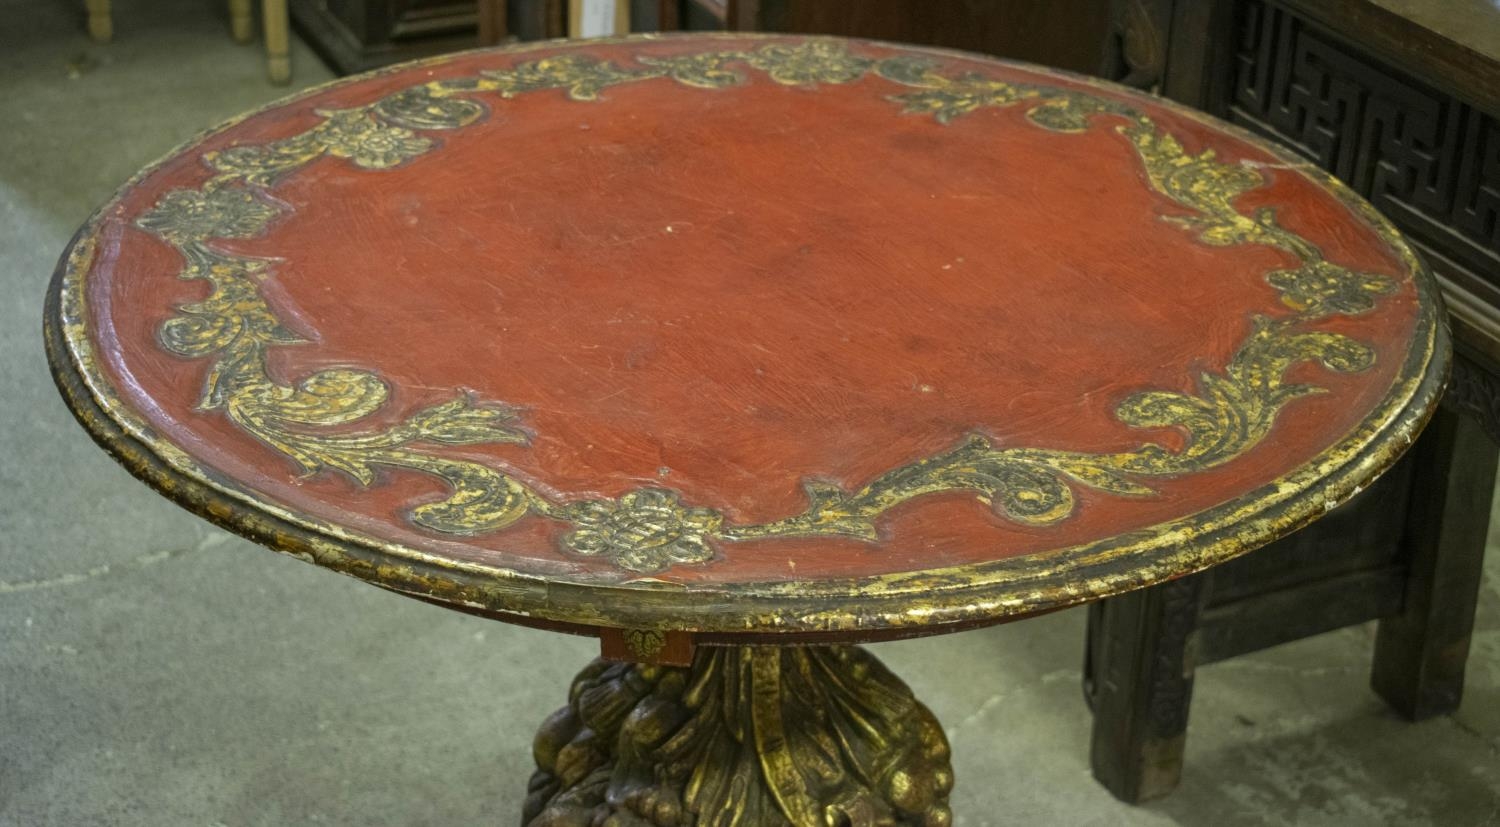 CENTRE TABLE, 74cm H x 91cm diam, Spanish baroque style, red painted, giltwood and gilt metal - Image 2 of 5